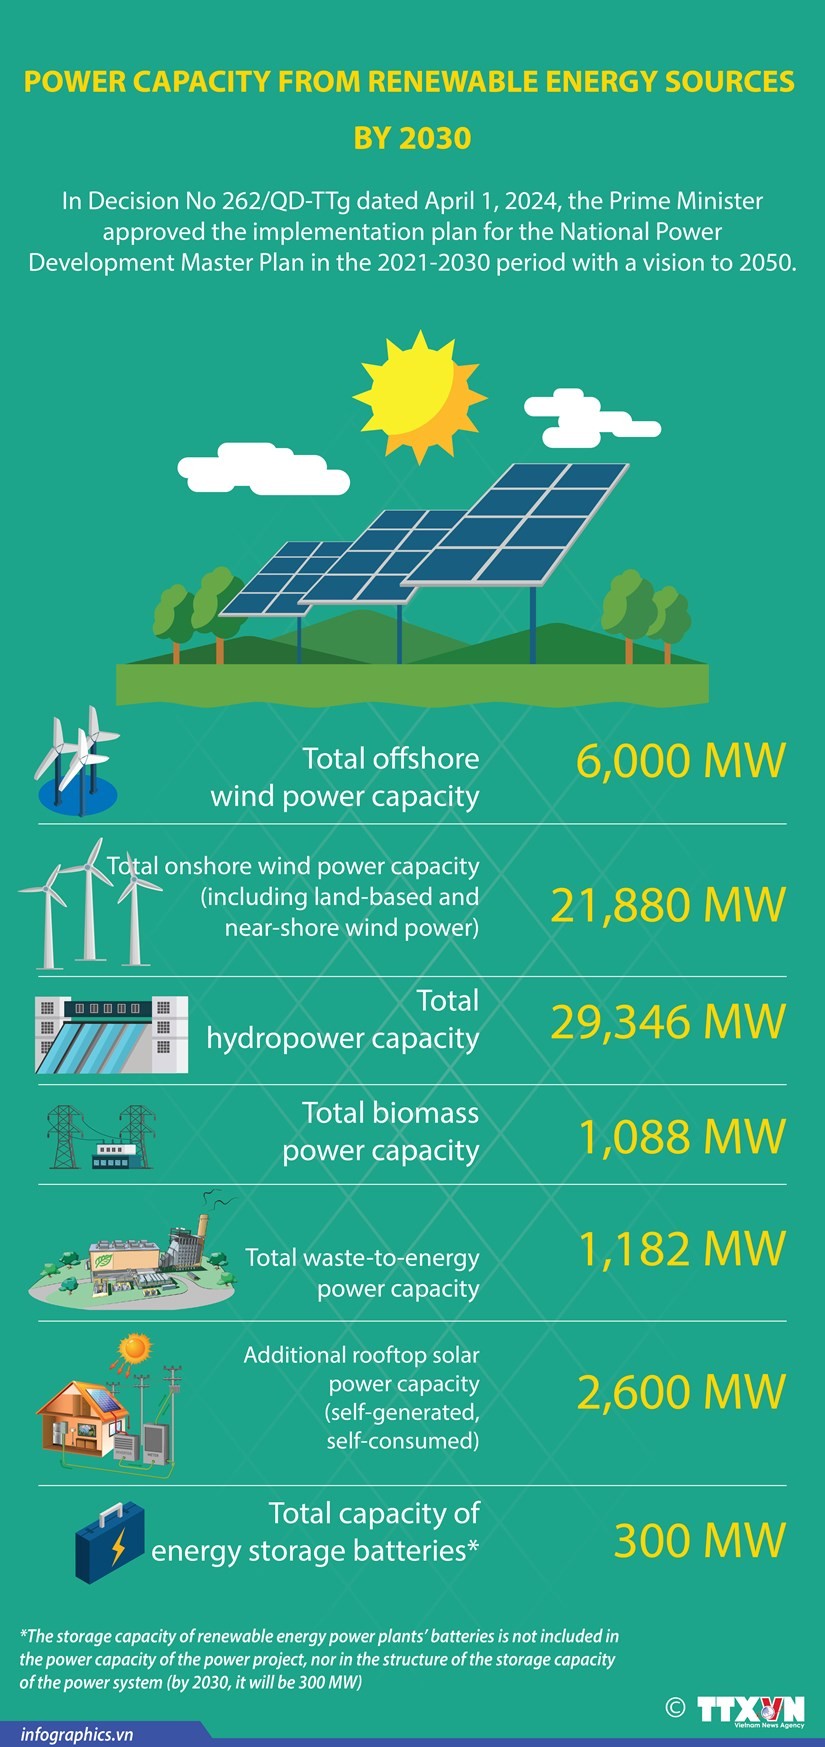 Power capacity from renewable energy sources by 2030